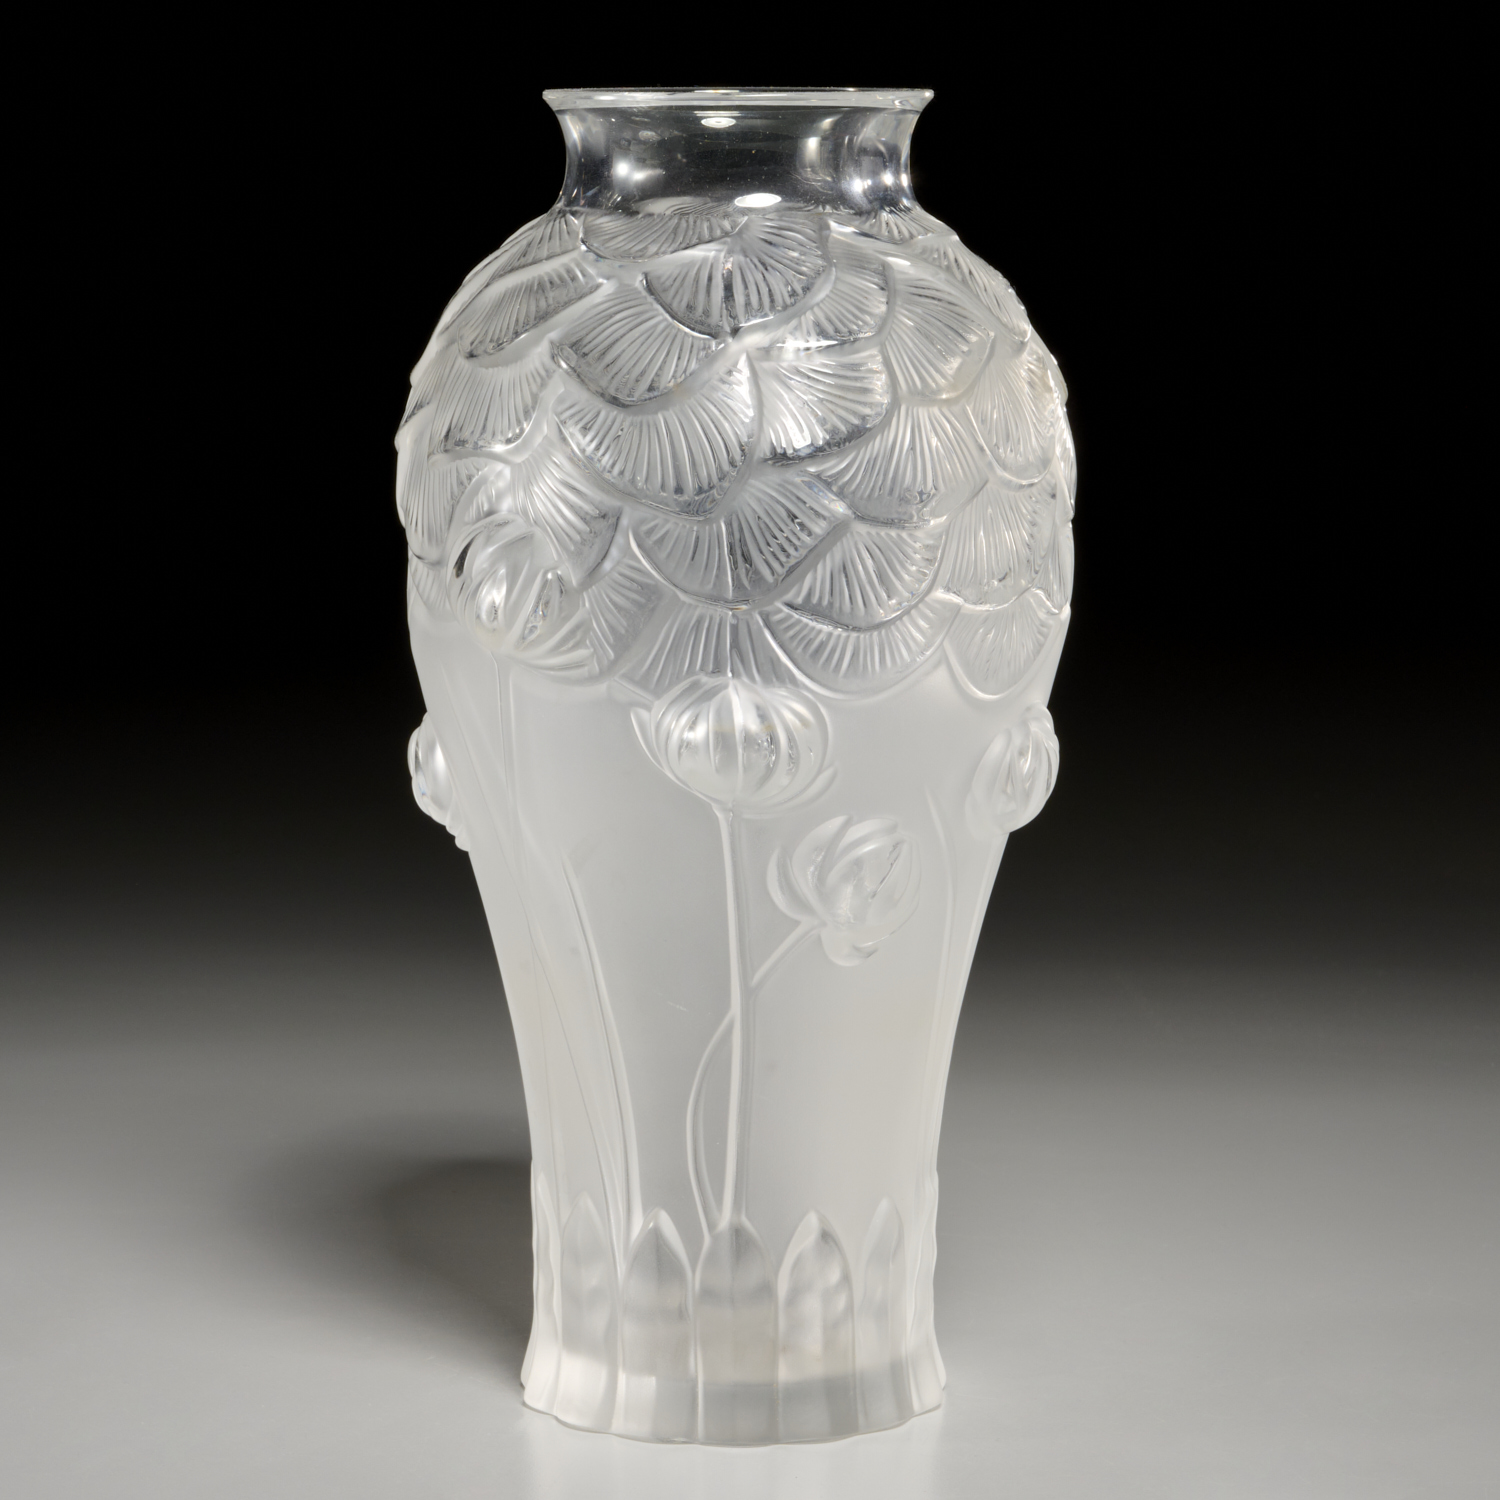 RENE LALIQUE GIVERNY VASE 20th 3b4824